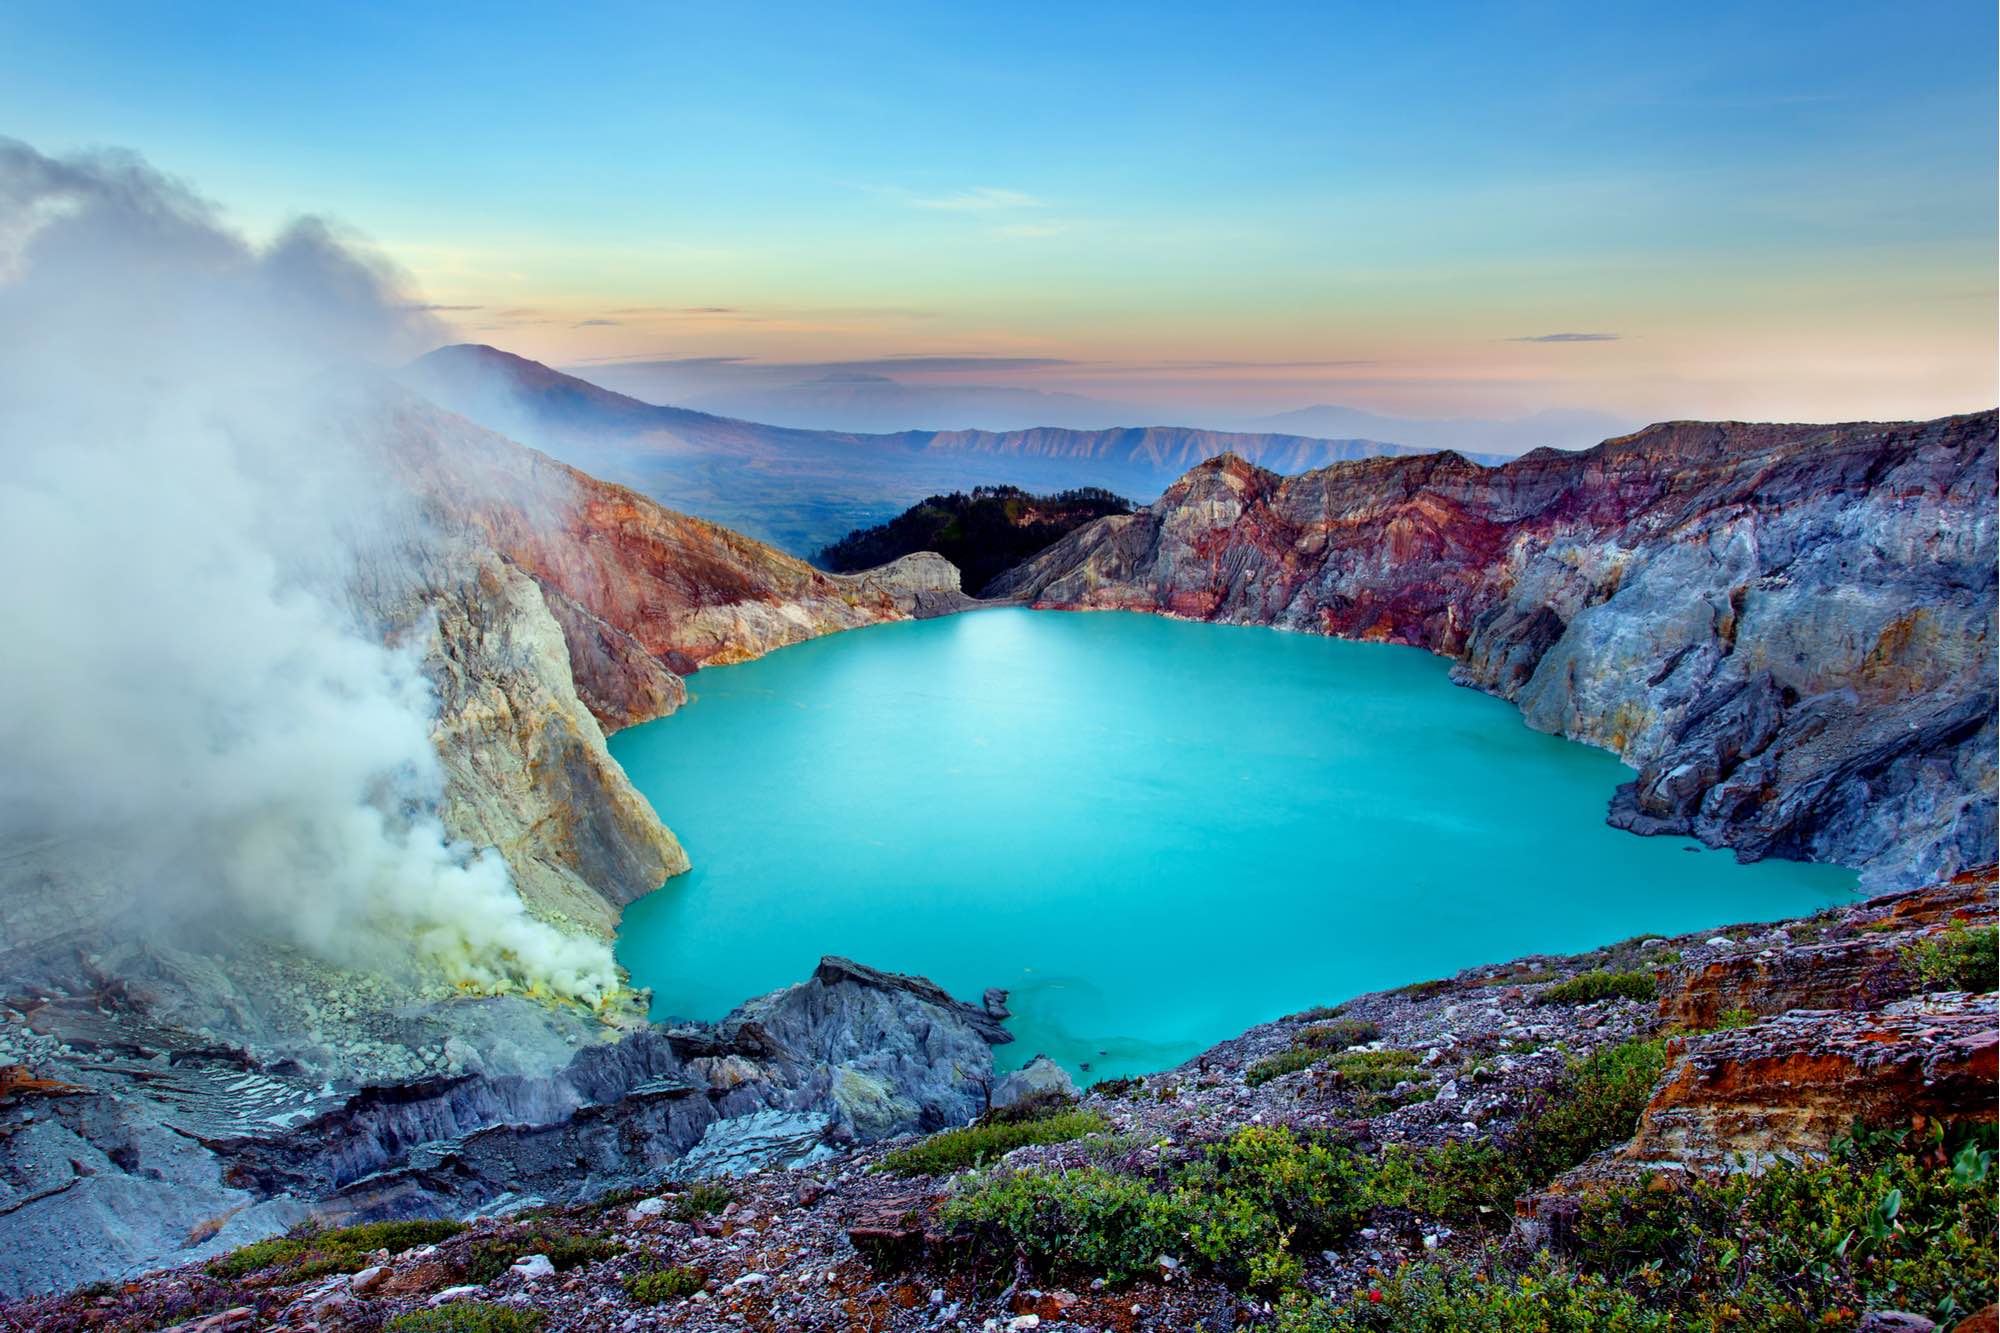 A Day Trip to the Blue Fire Volcano